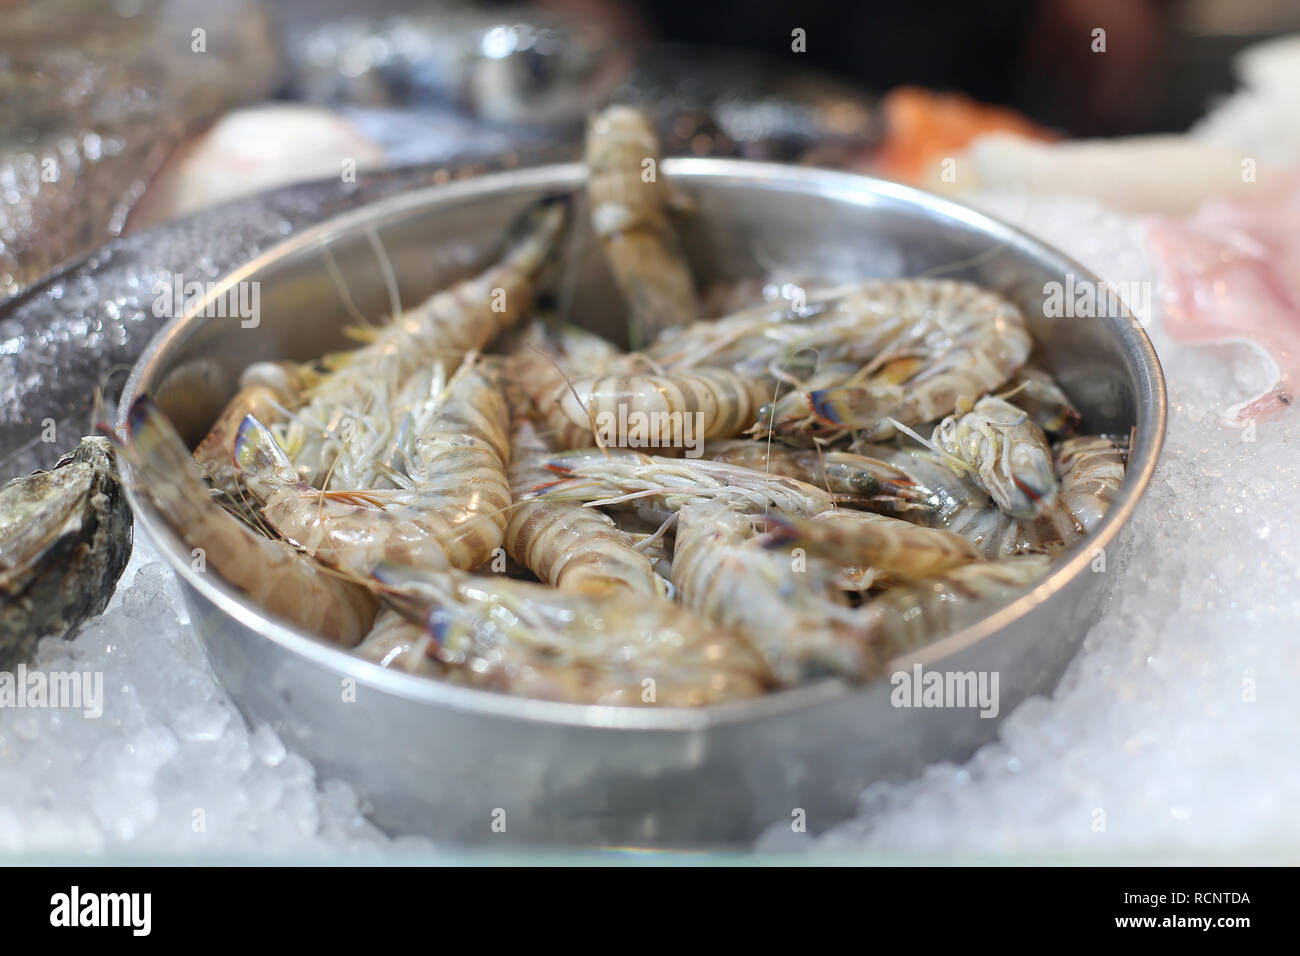 Gray shrimps in a bowl placed on ice. Uncooked sea food at the framers market. Fresh food ingredient background. Stock Photo